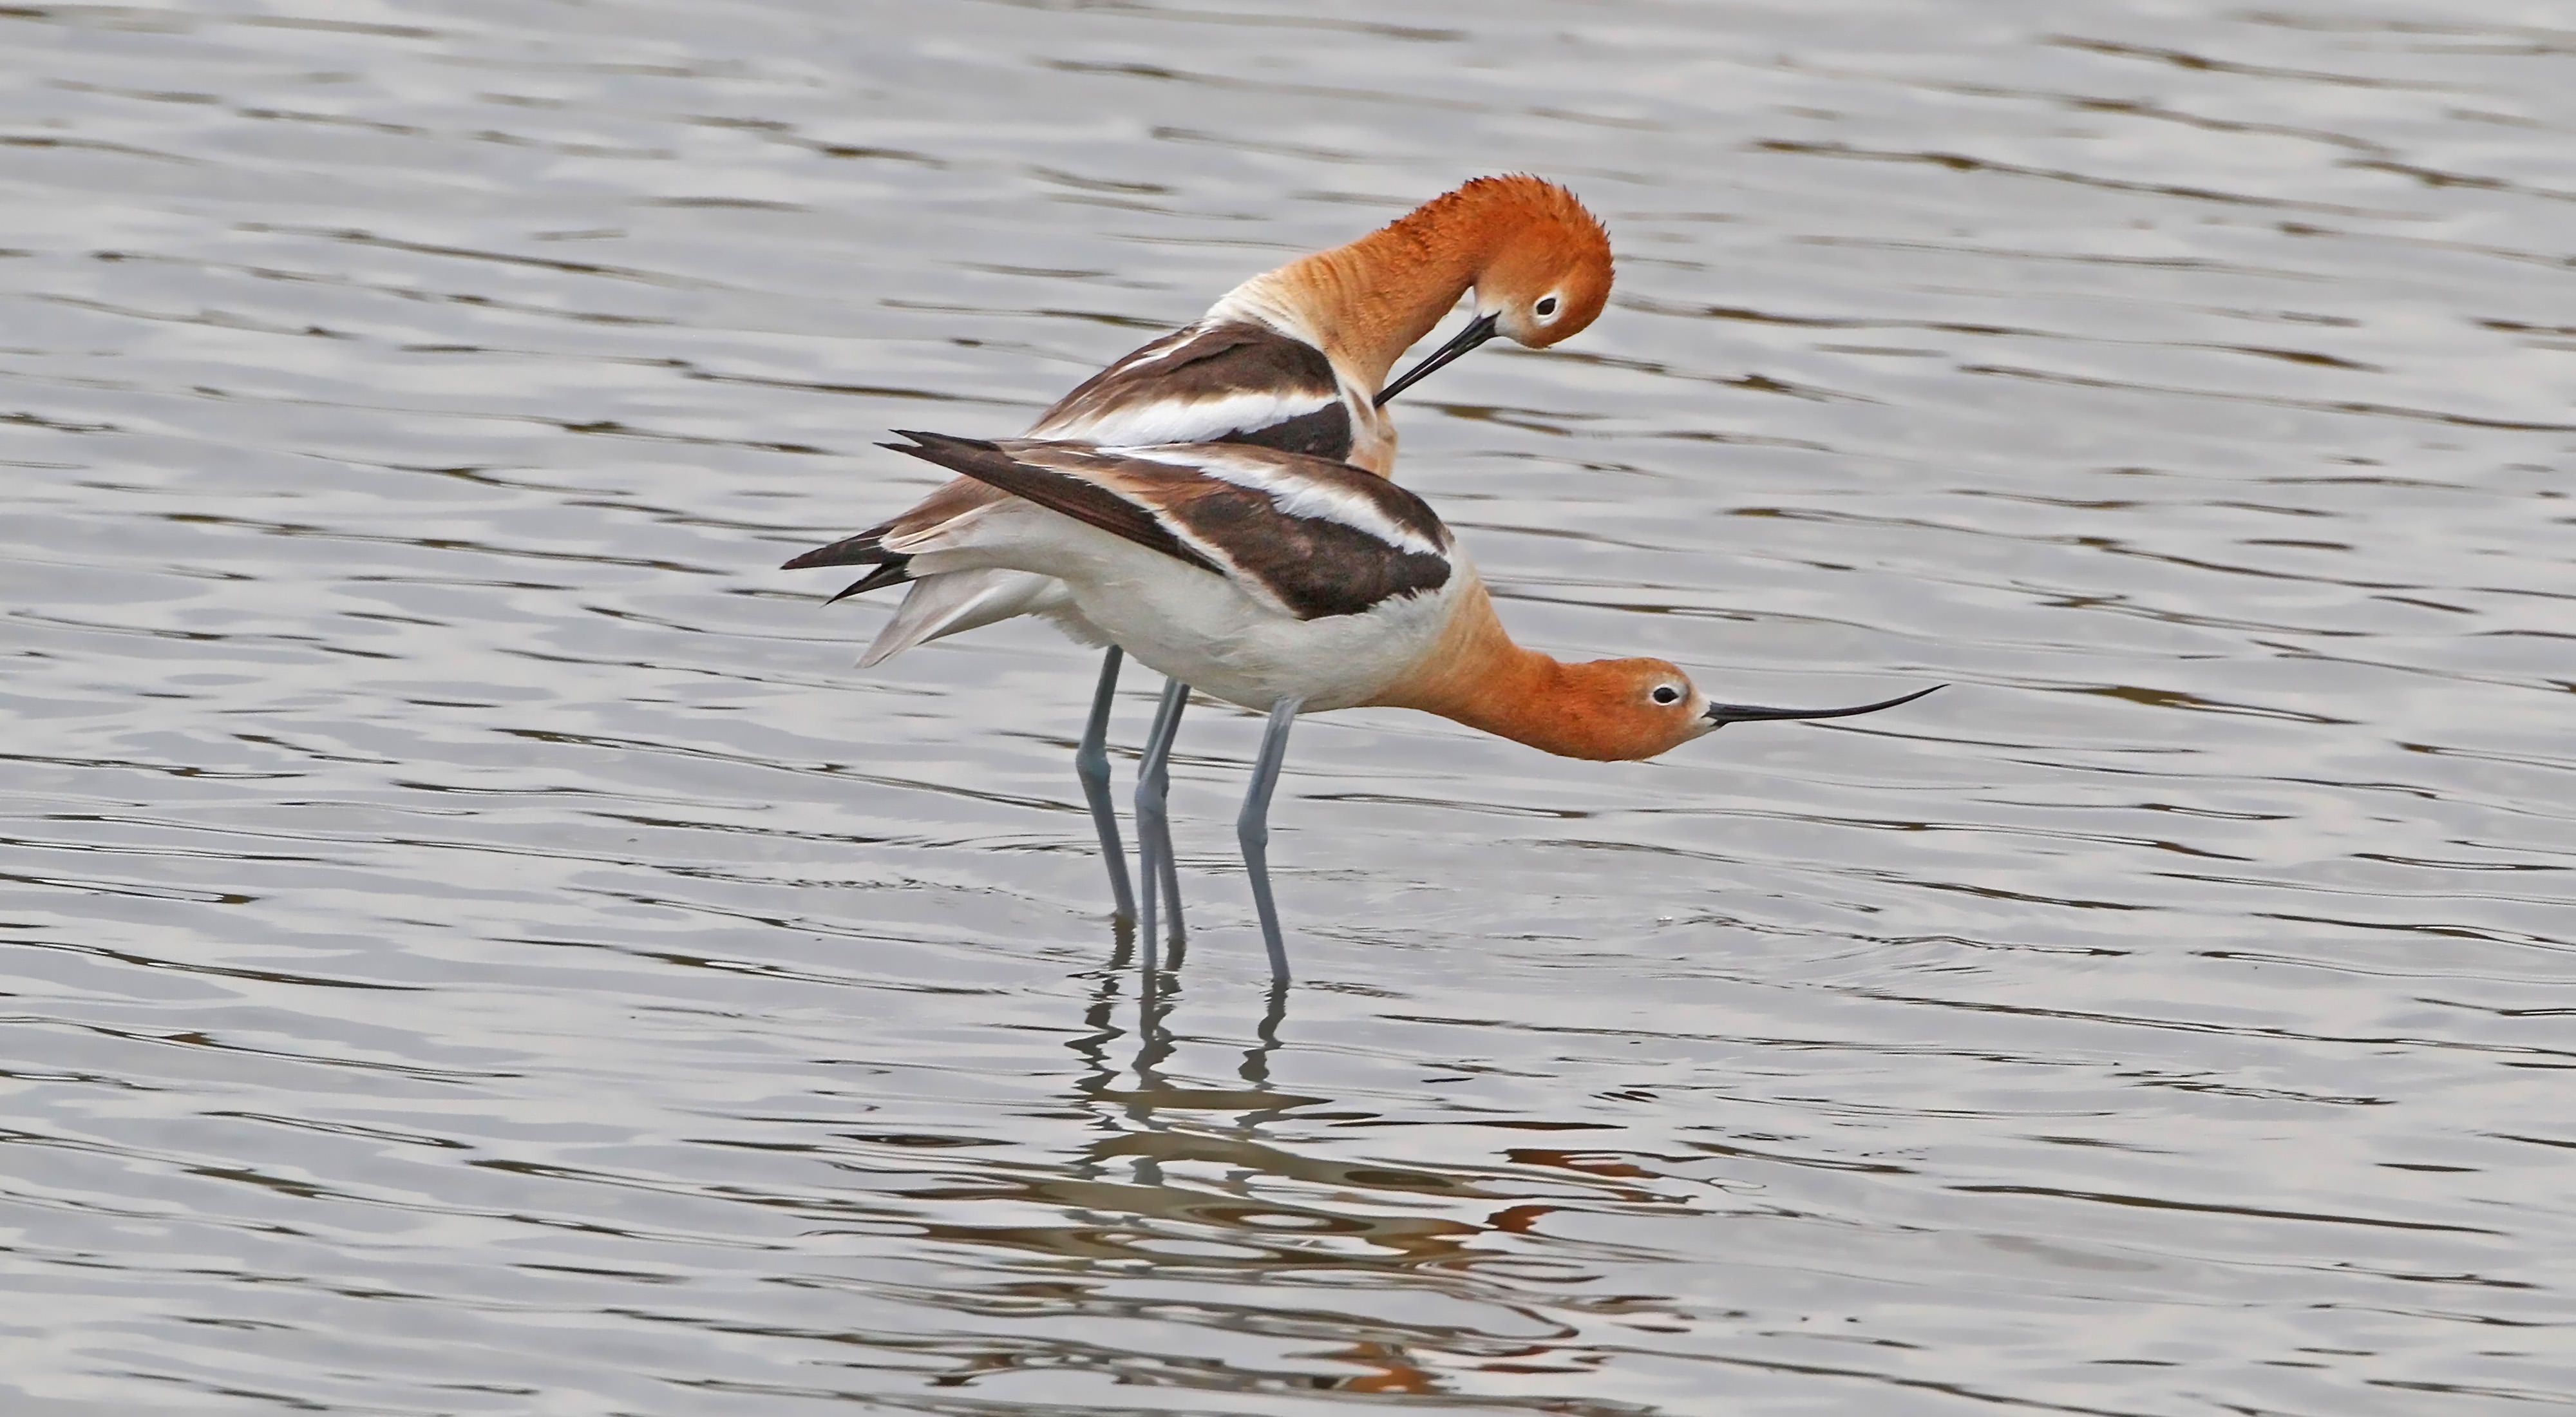 Two red-headed birds entwined while standing in shallow water.